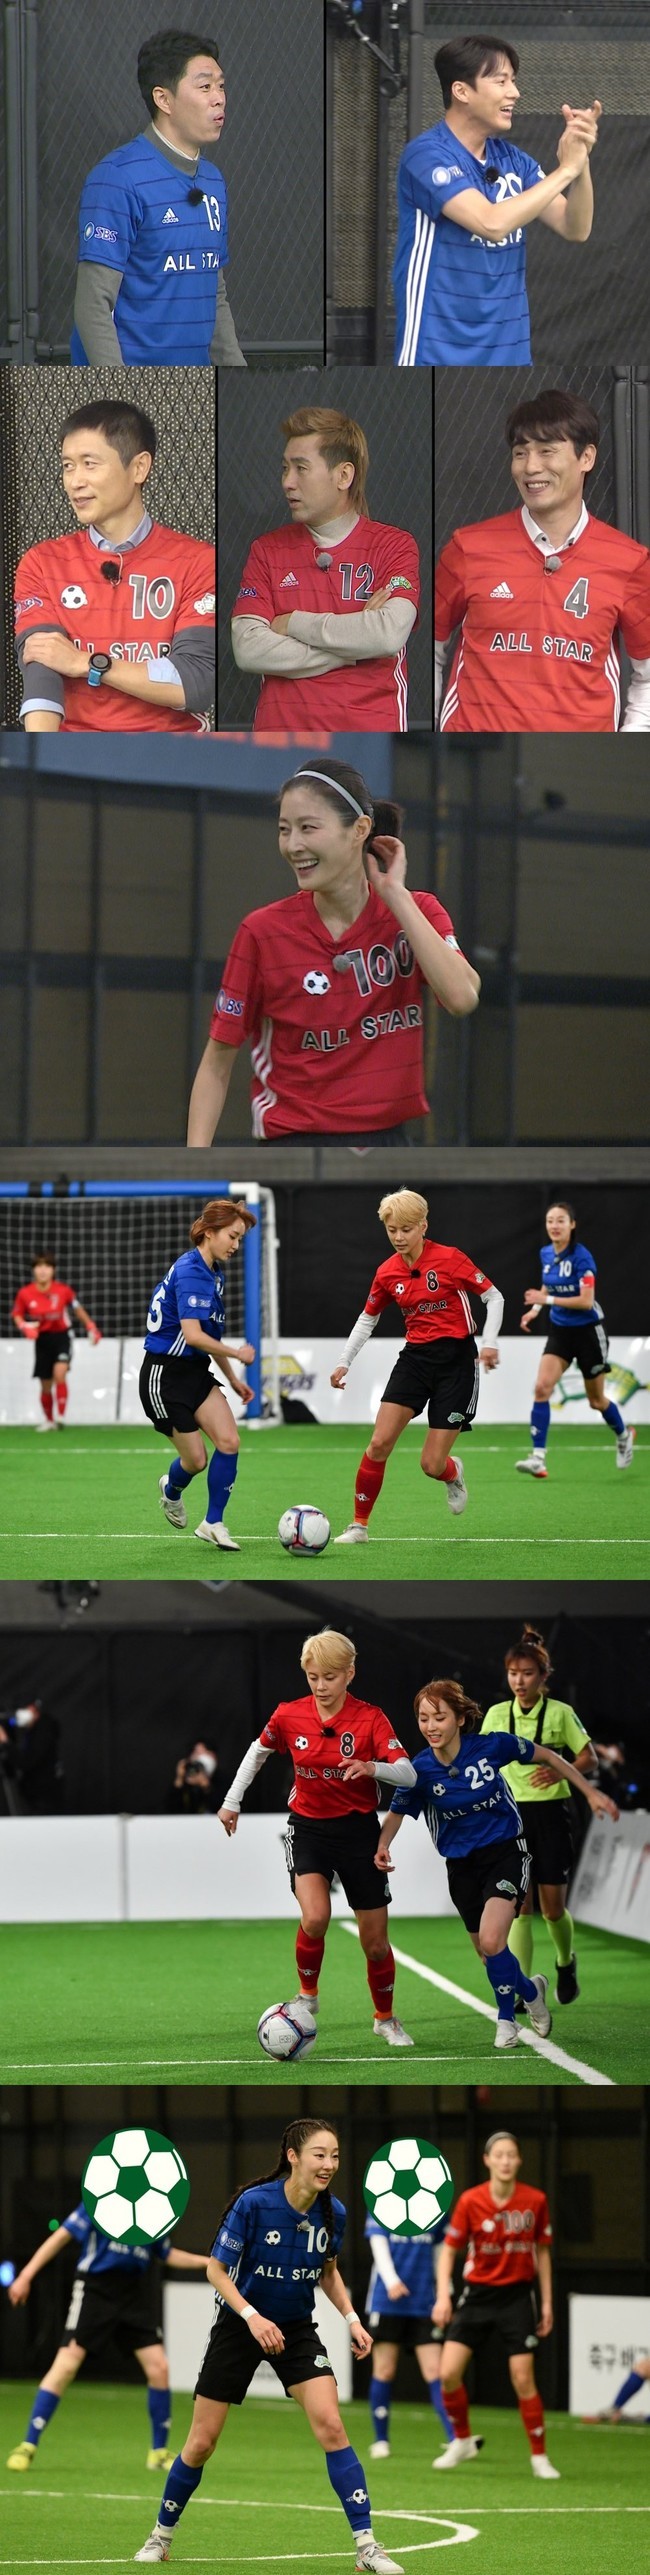 Each team Ace is in conflict.On April 13, the Season 2 All-Star Game will be held, where members of Choi Jeong-ye, SBSs Goal-hitting Girls (hereinafter referred to as Goal-hitting Girls), will gather together.In Goal Women, the All-Star Game will be unveiled to spectacularly decorate the finale of the season 2 league game, which ended successfully.The All-Star Game will be a match for the pride of six coaches, who are divided into two teams: brother and brother, and the Ace members, who are selected by six directors.First, the Red Team, led by Kim Byung-ji, Choi Jin-chul and Lee Young-pyo, succeeded in suppressing the steamer by naming FC Actionista Jeong He-In first.Jeong He-In was known to have been the first draft winner to be the owner of a kick with brilliant footwork and ankle strength.It seems that Lee Hyun-yi, a striker of FC Gucheok Jangsin, and Cho Hye-ryun, the head of FC Gavengers, have built power.Meanwhile, Lee Chun-soo, Hyun Young-min, and Baek Ji-hoons Blue Team are also unusual.FC Actionista set piece kicker Yun Tae-Jin and goalkeeper Irene, who scored FCs ball game, will be introduced with a brilliant technique, starting with Choi Yeo-jin, a two-footed player.In particular, this All-Star Game is the back door that everyone enjoyed Happy Football away from the competition.This seems to have been a big role for FC Anaconda Yun Tae-Jin, who suffered five losses in five games.It is noteworthy whether Yun Tae-Jin, who is known to have played unstoppable, will finally be able to solve his wish with victory.